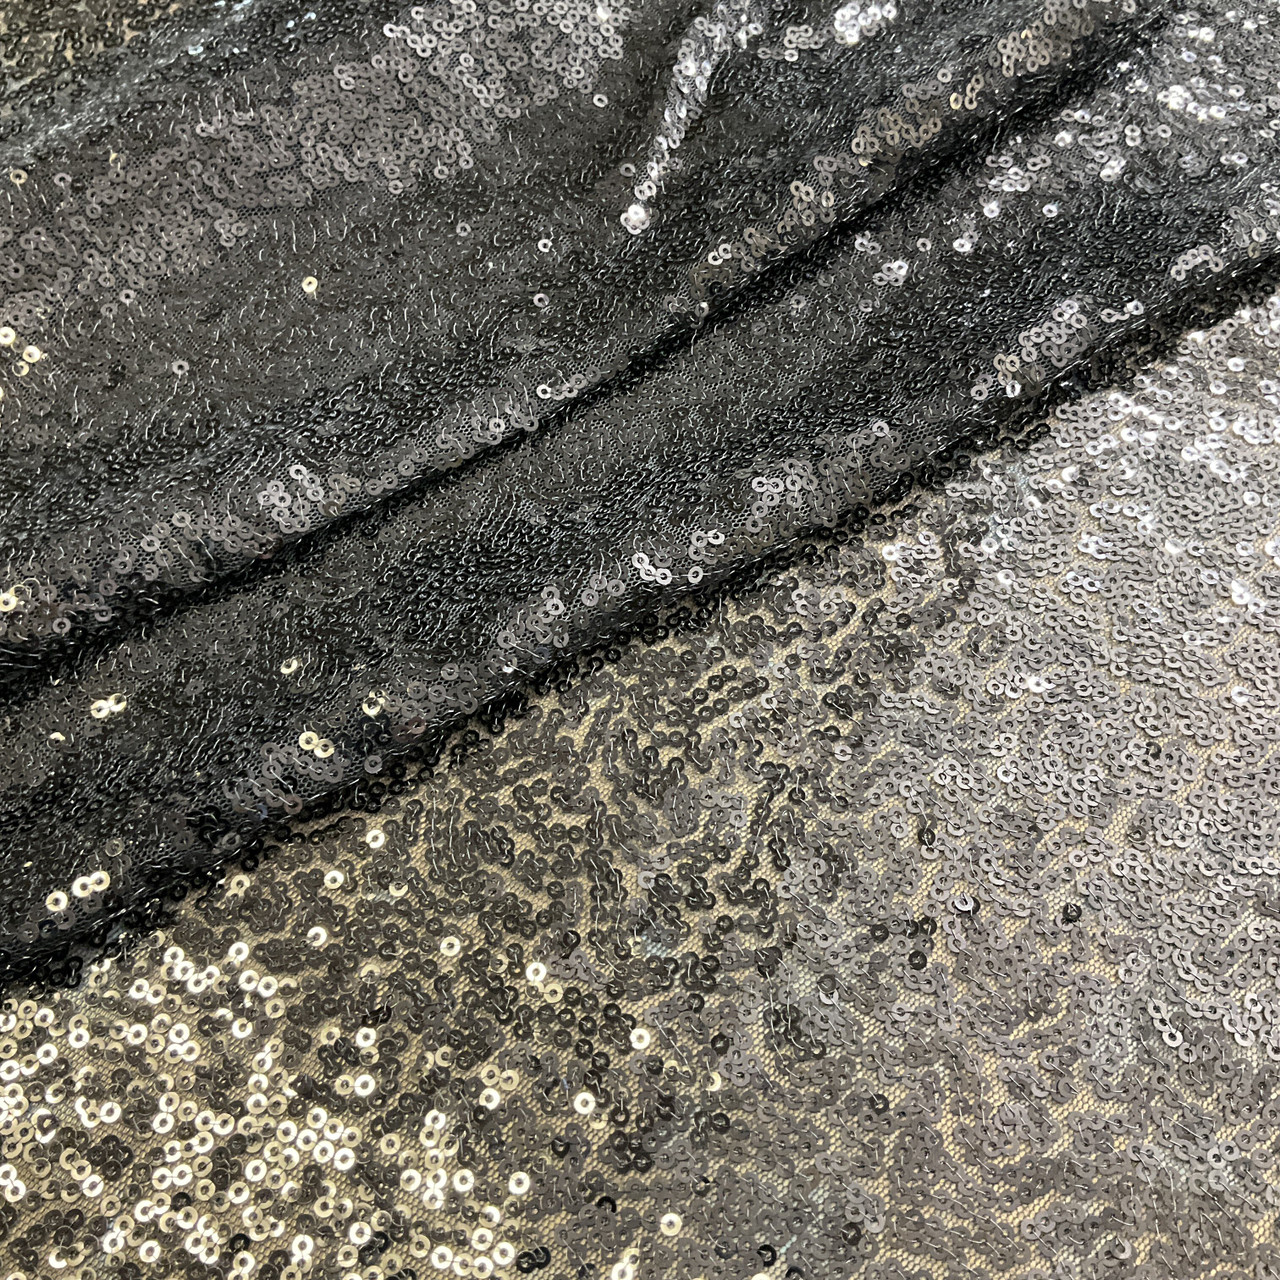 Black 20mm Sequin Stretch Trim by the Metre